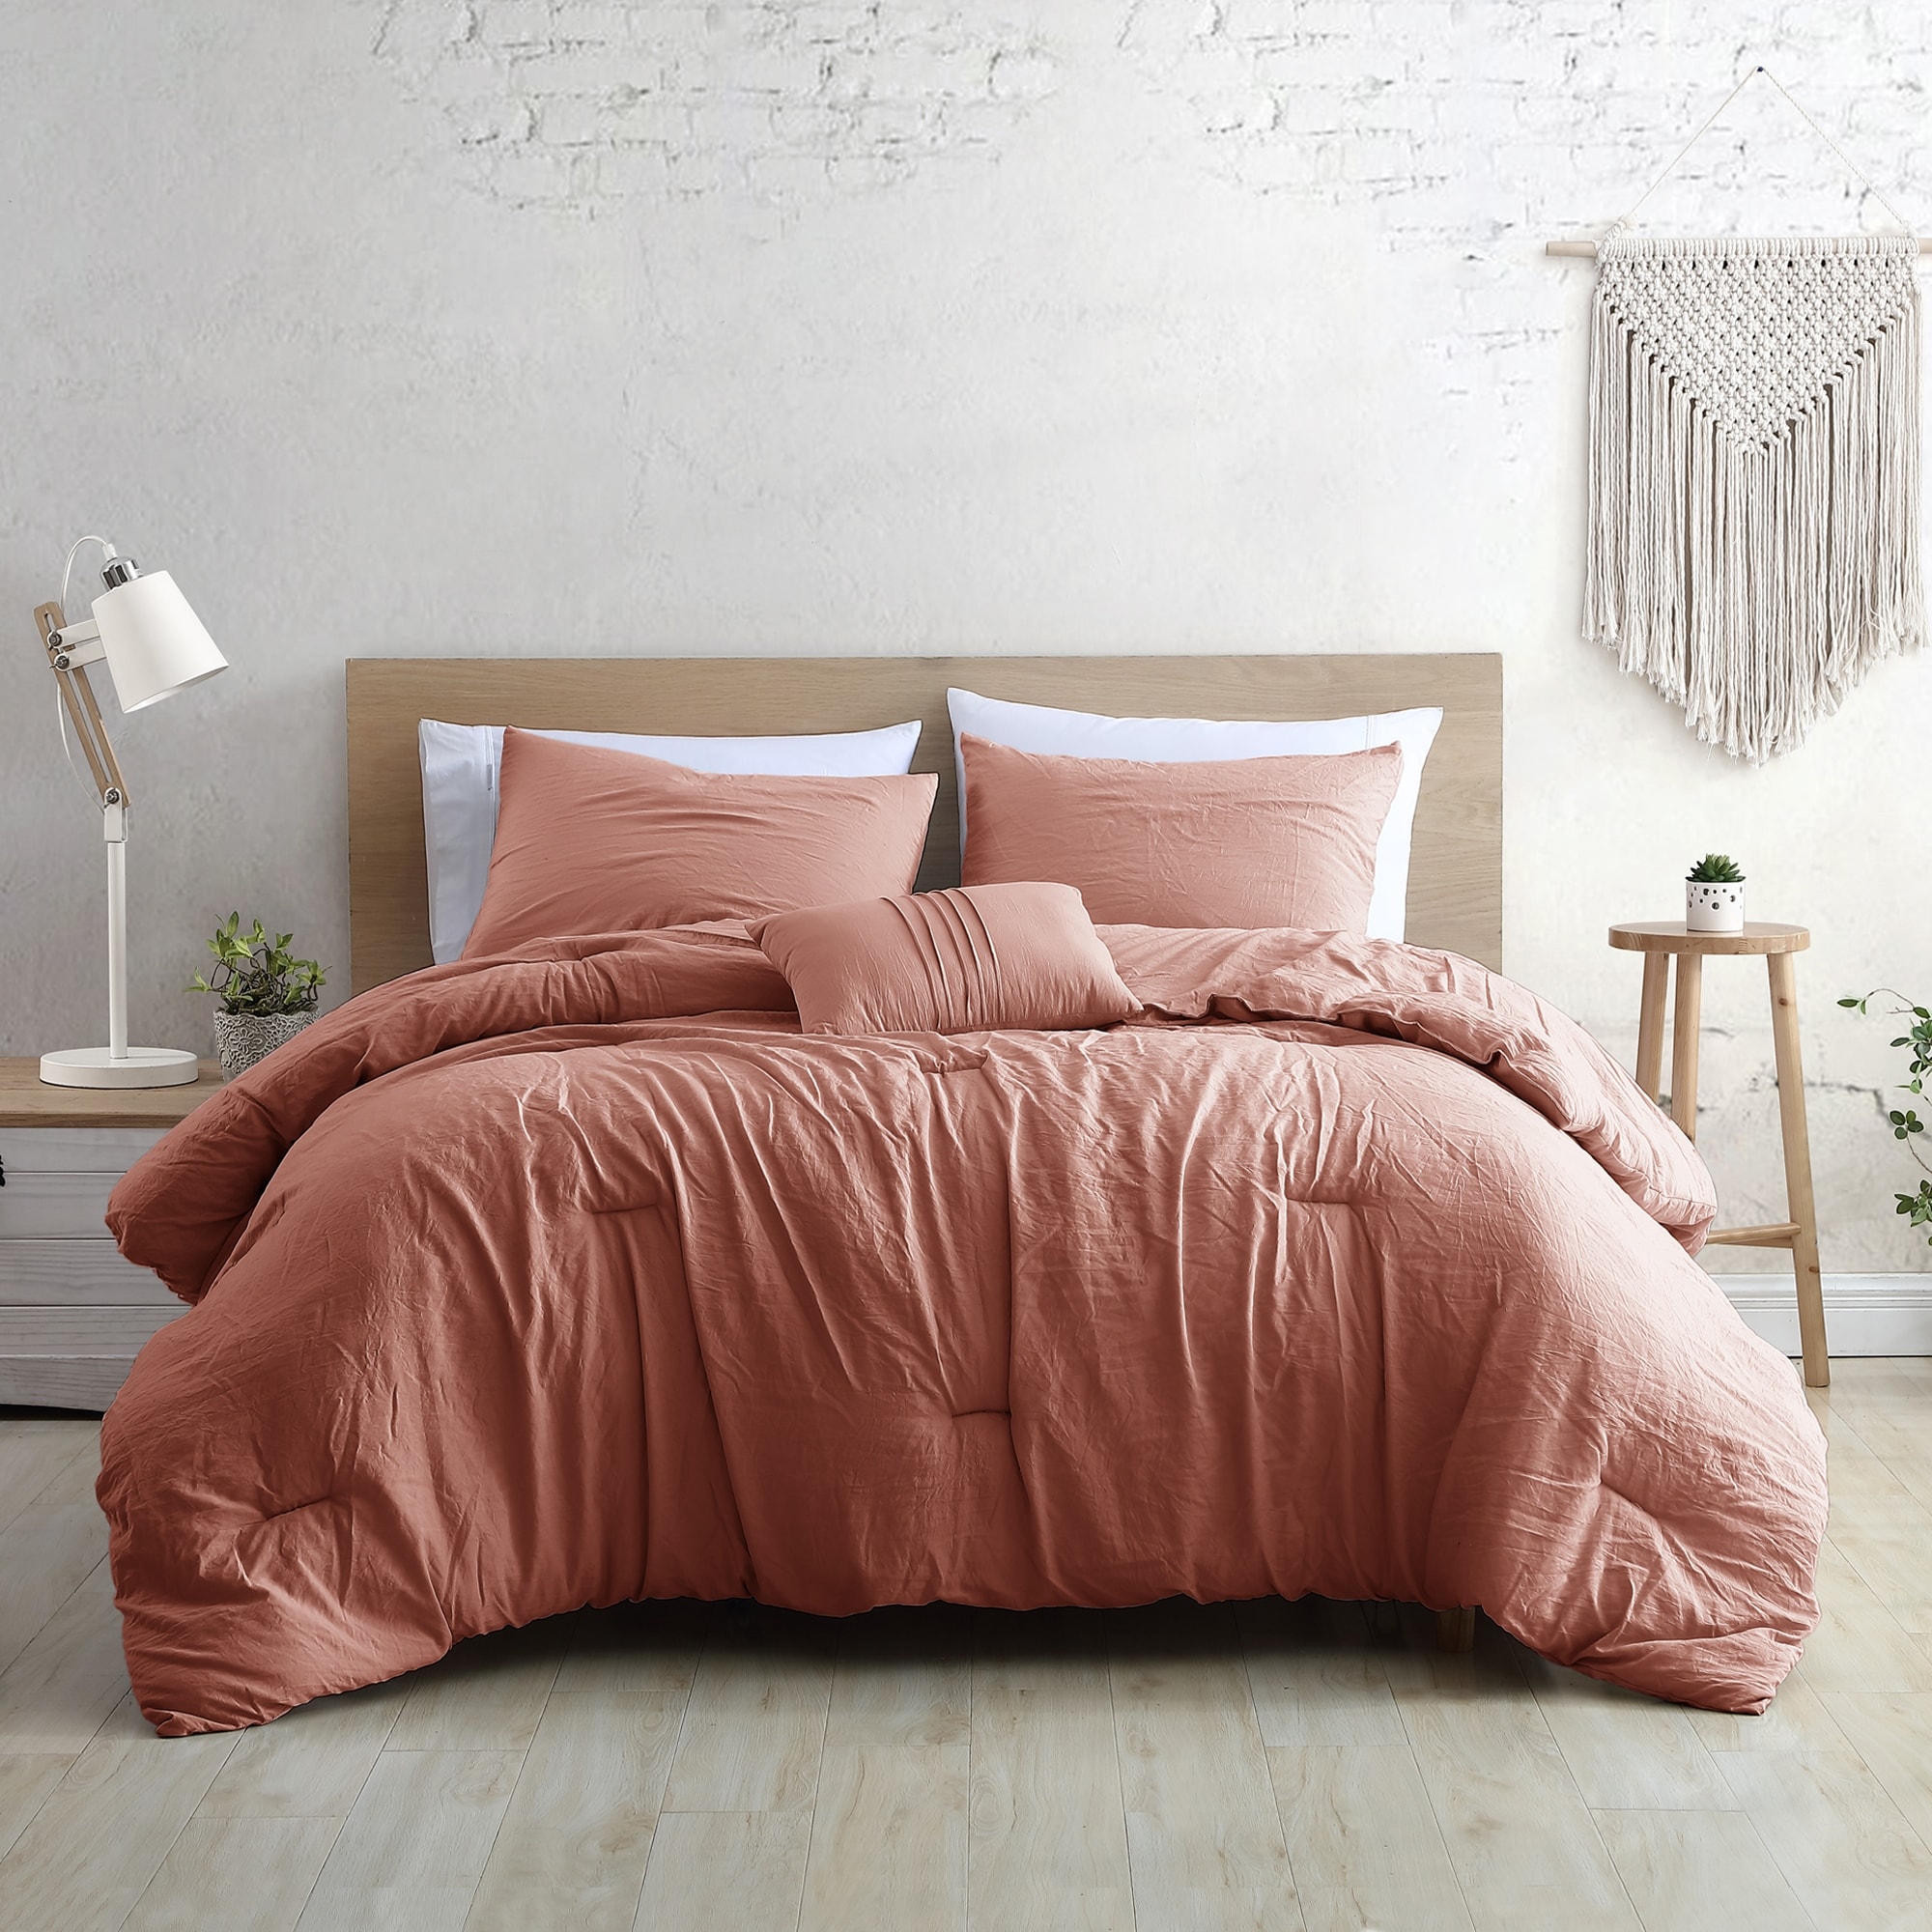 King Size Microfiber Comforters and Sets - Bed Bath & Beyond